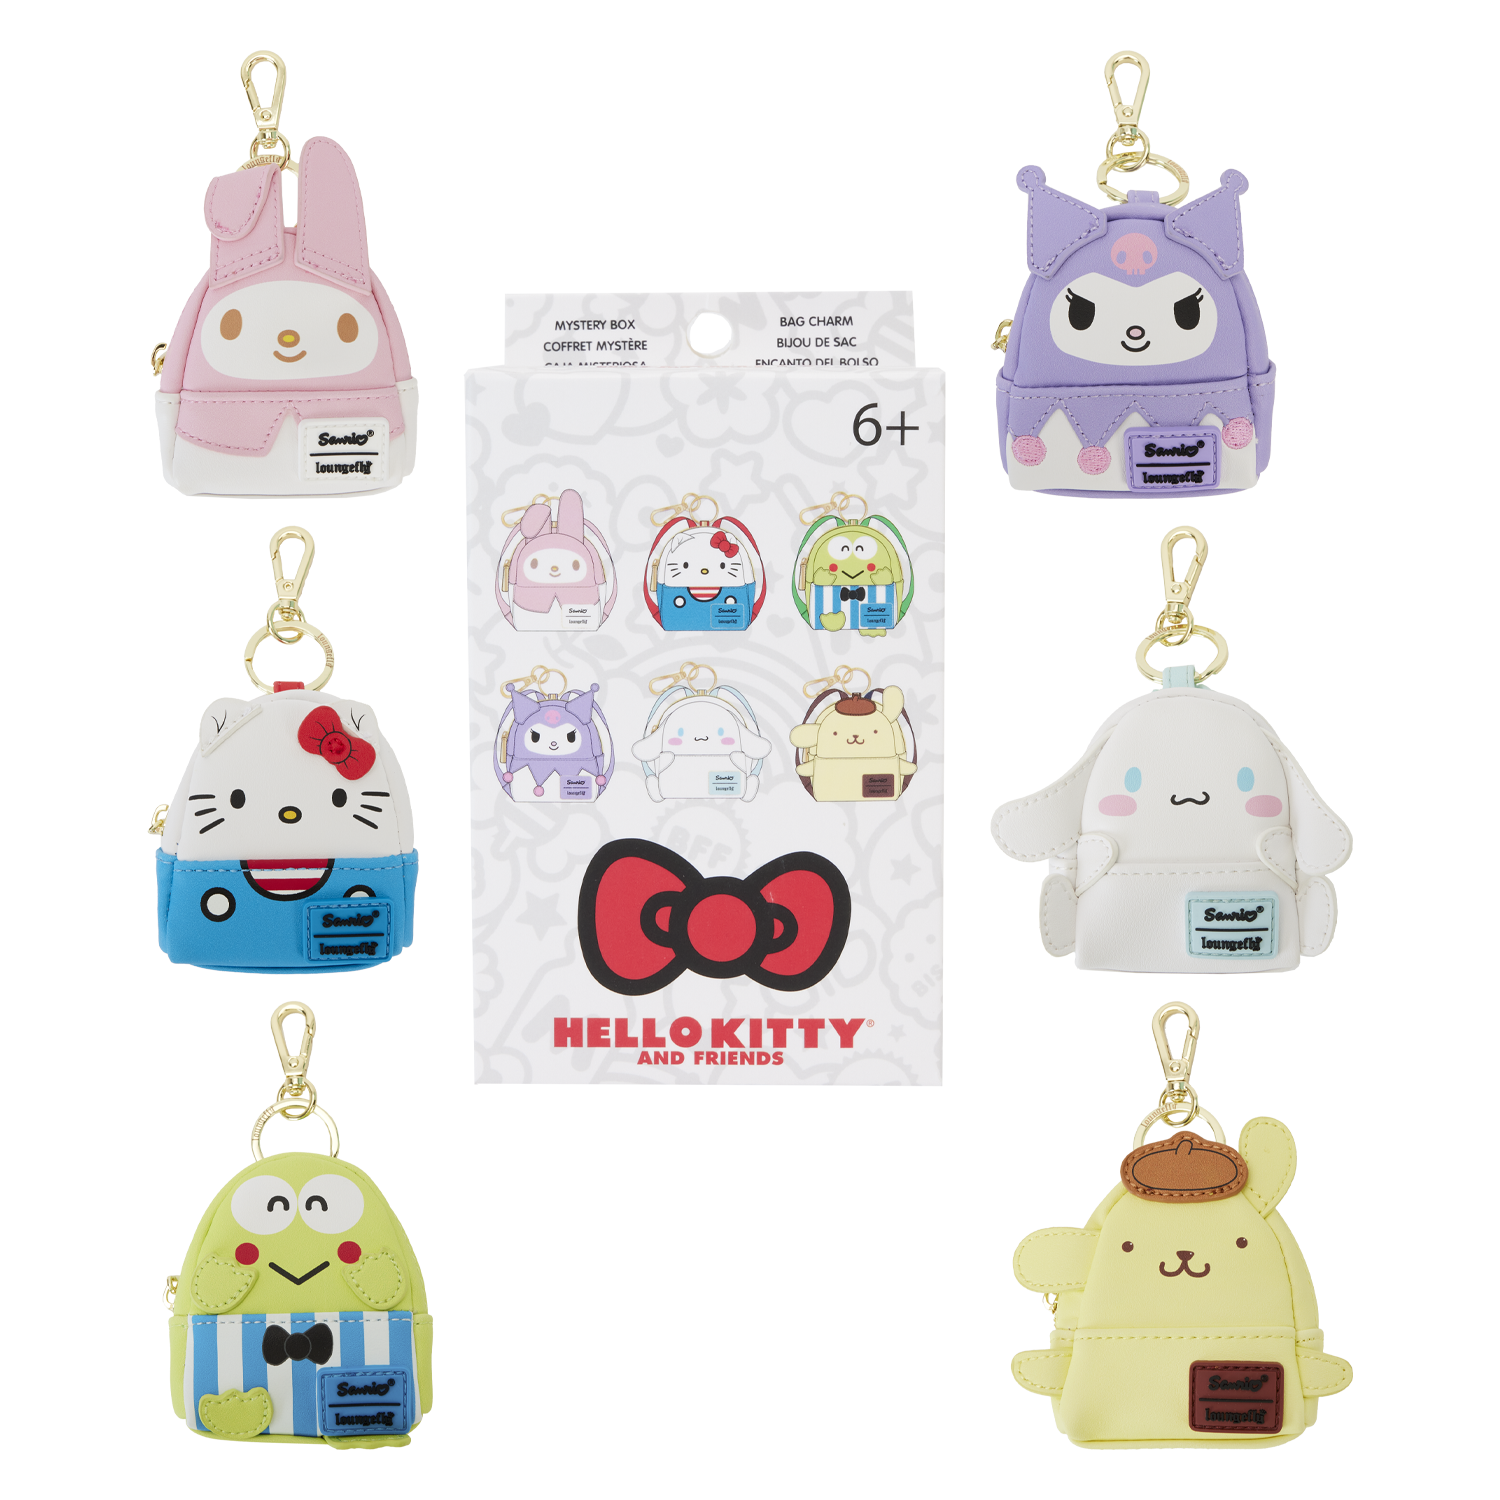 Sanrio Characters Gift Bag – Hello Discount Store